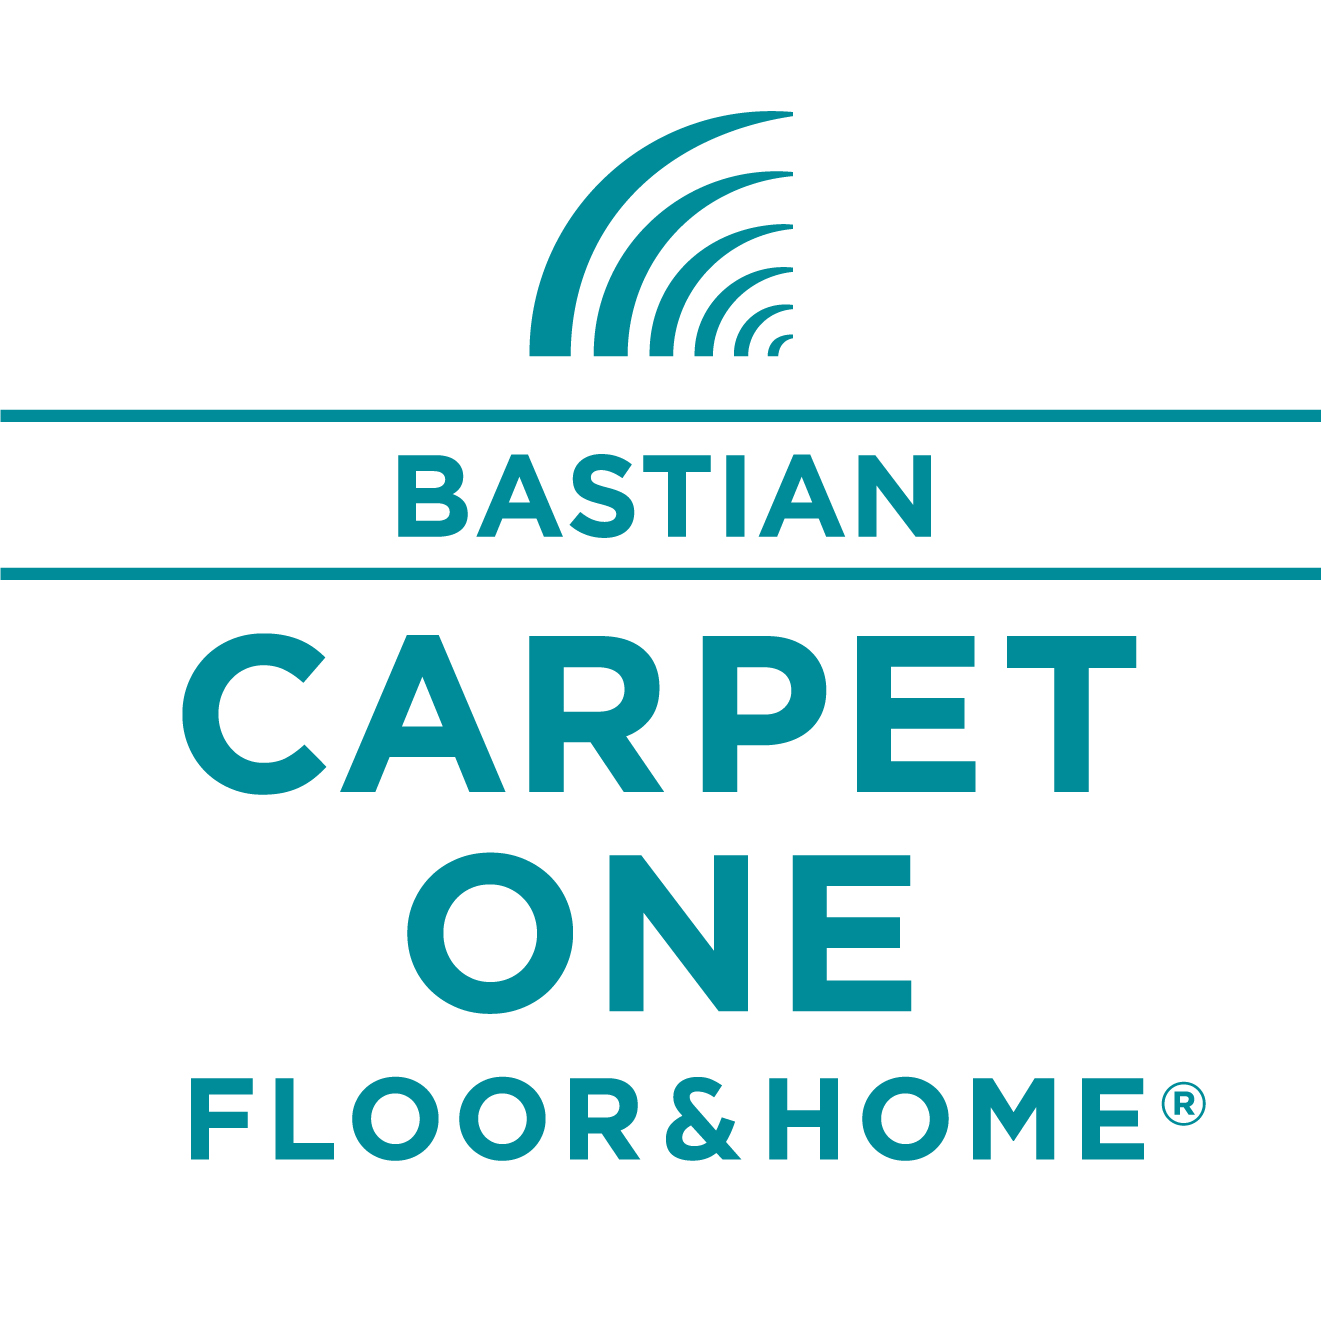 Bastian Carpet One Floor and Home 